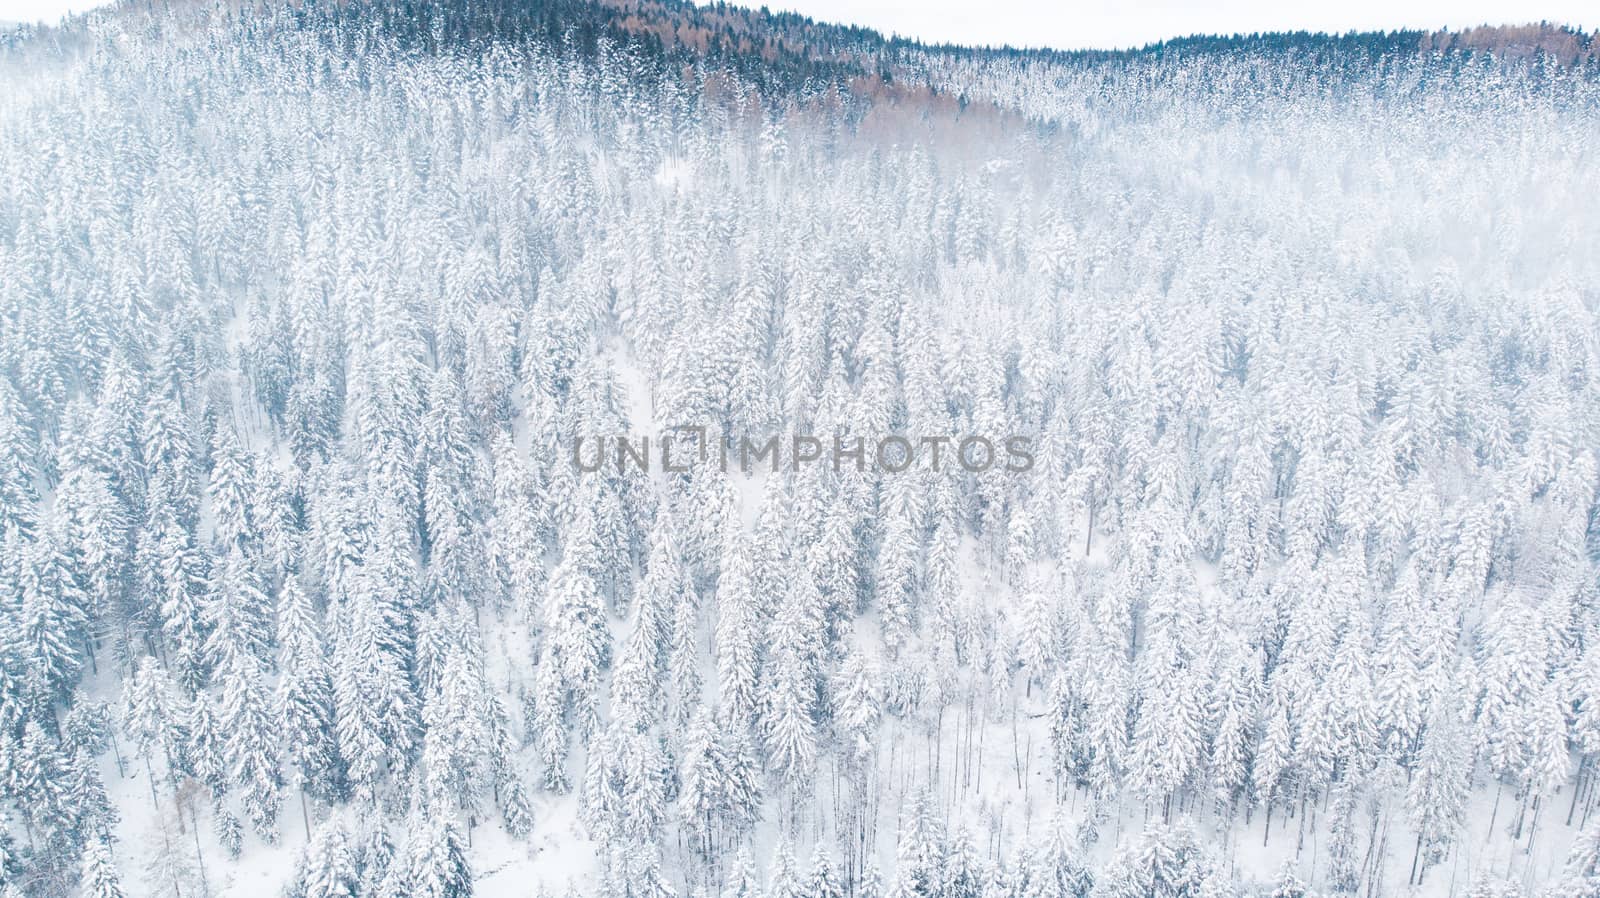 Snow Covered Pine Trees on Hillside in Mountains. Aerial Drone View.